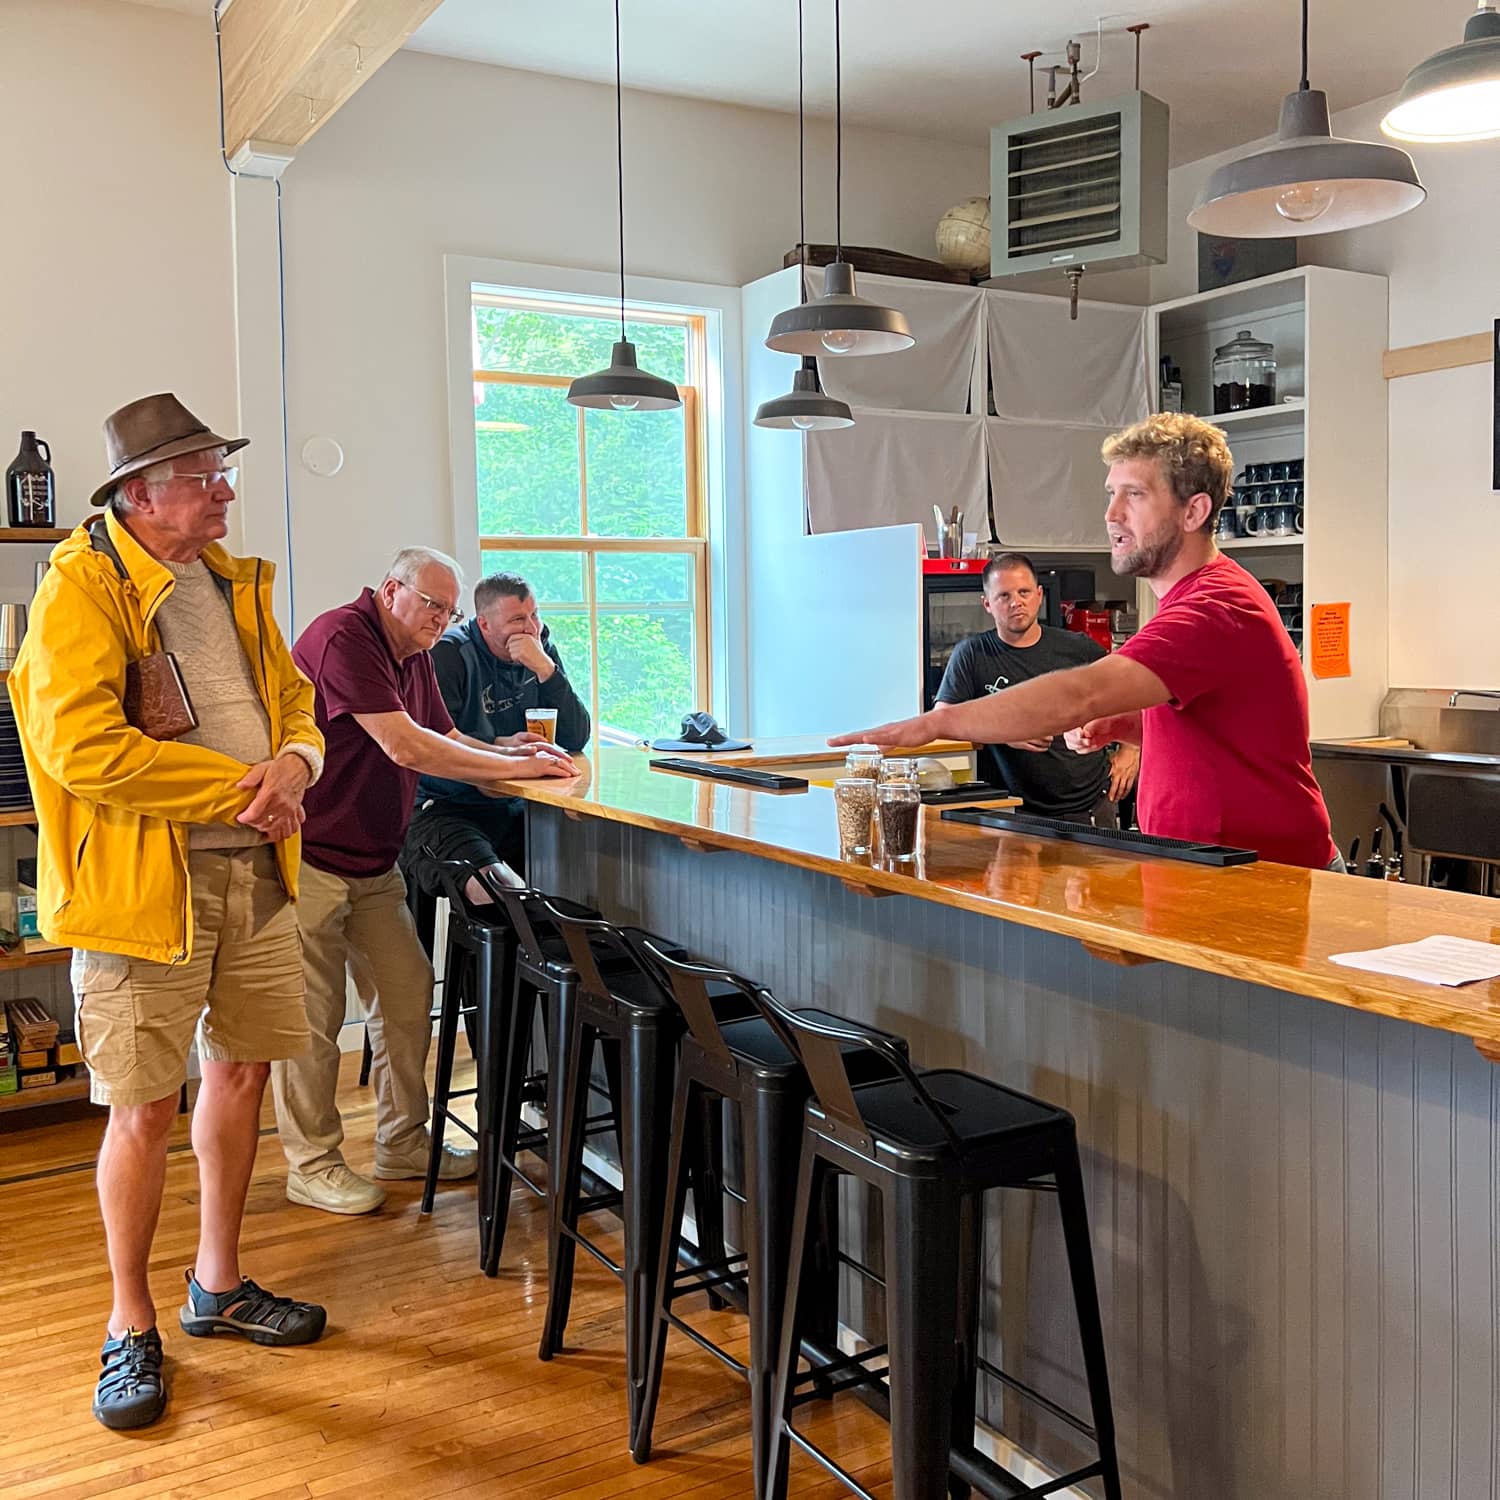 One of the co-owners of North Haven Brewing talks about their beermaking process.